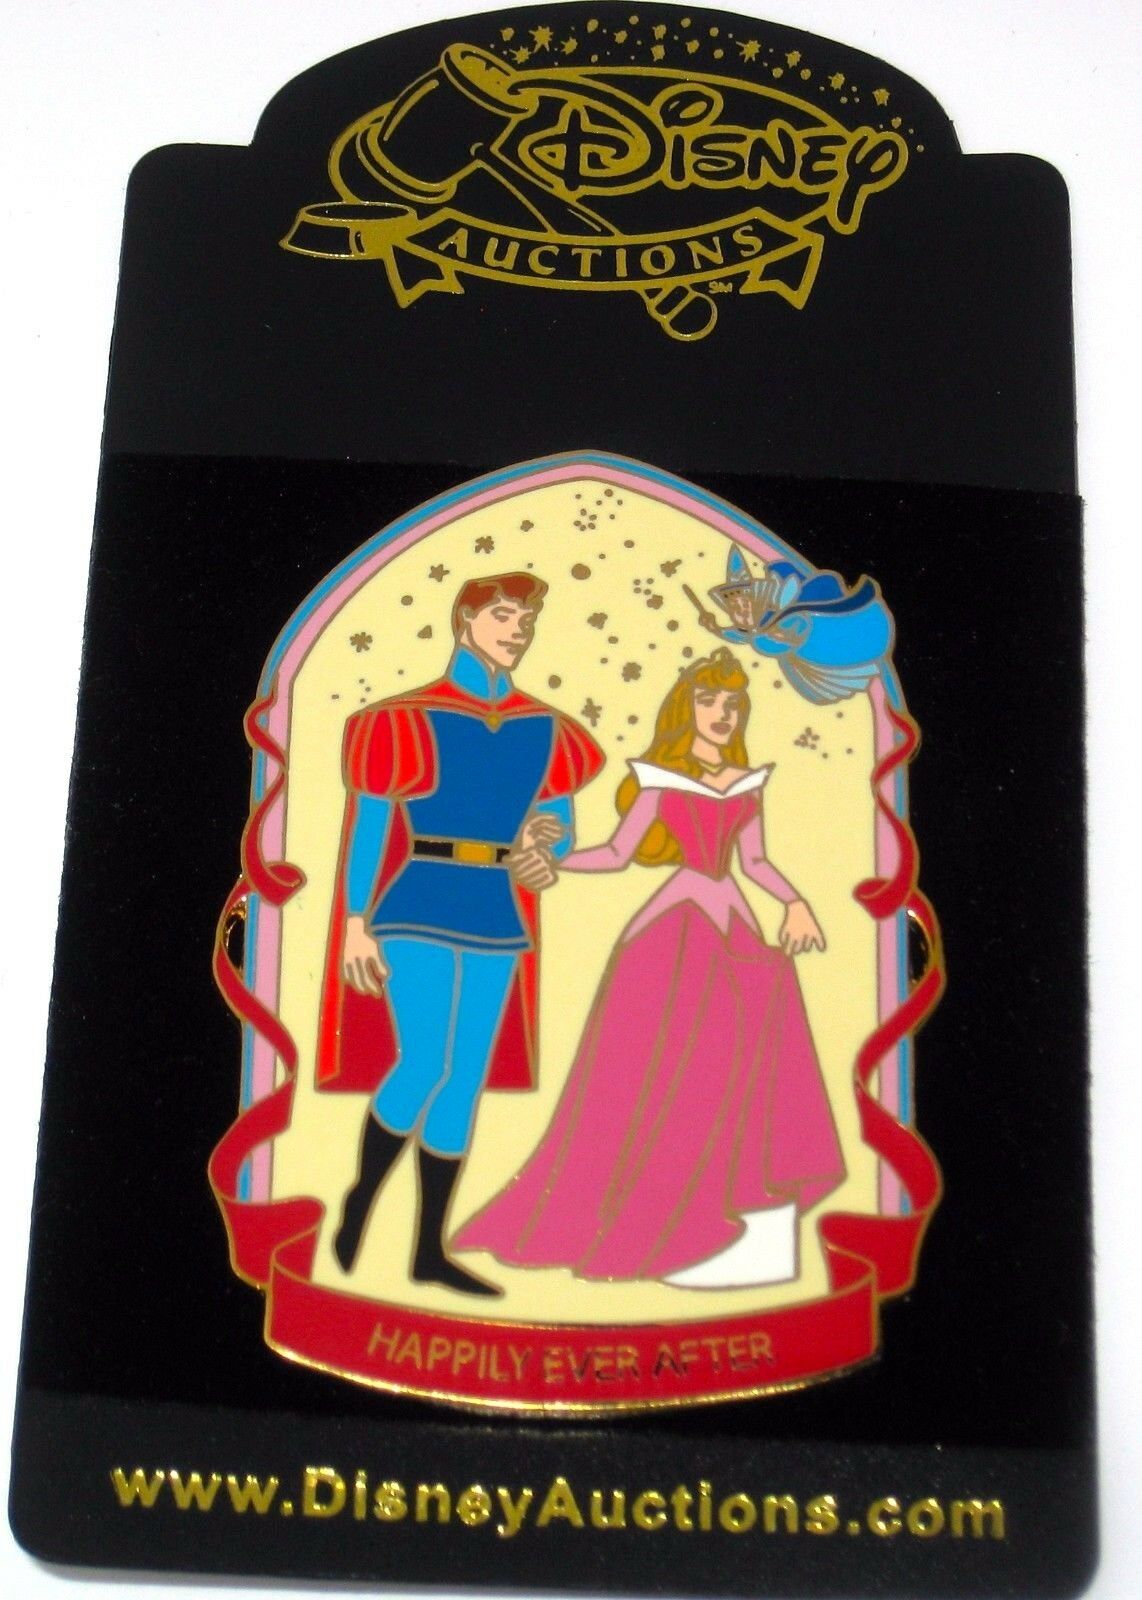 New Le 100 Disney Auction Pin✿ Sleeping Beauty Aurora Happily Ever After Phillip